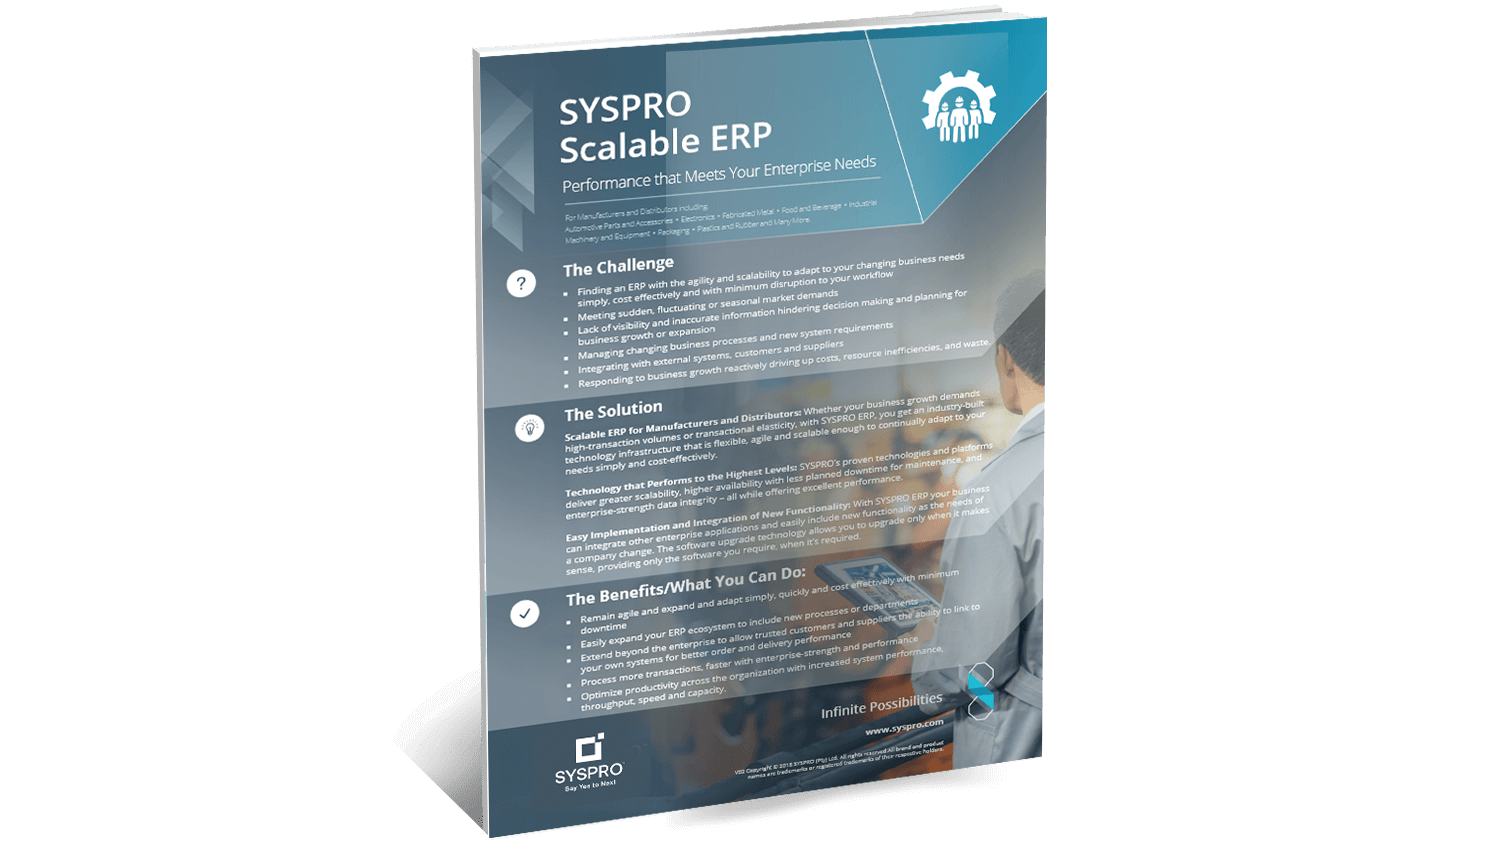 SYSPRO-ERP-software-system-scalable-erp-infographic